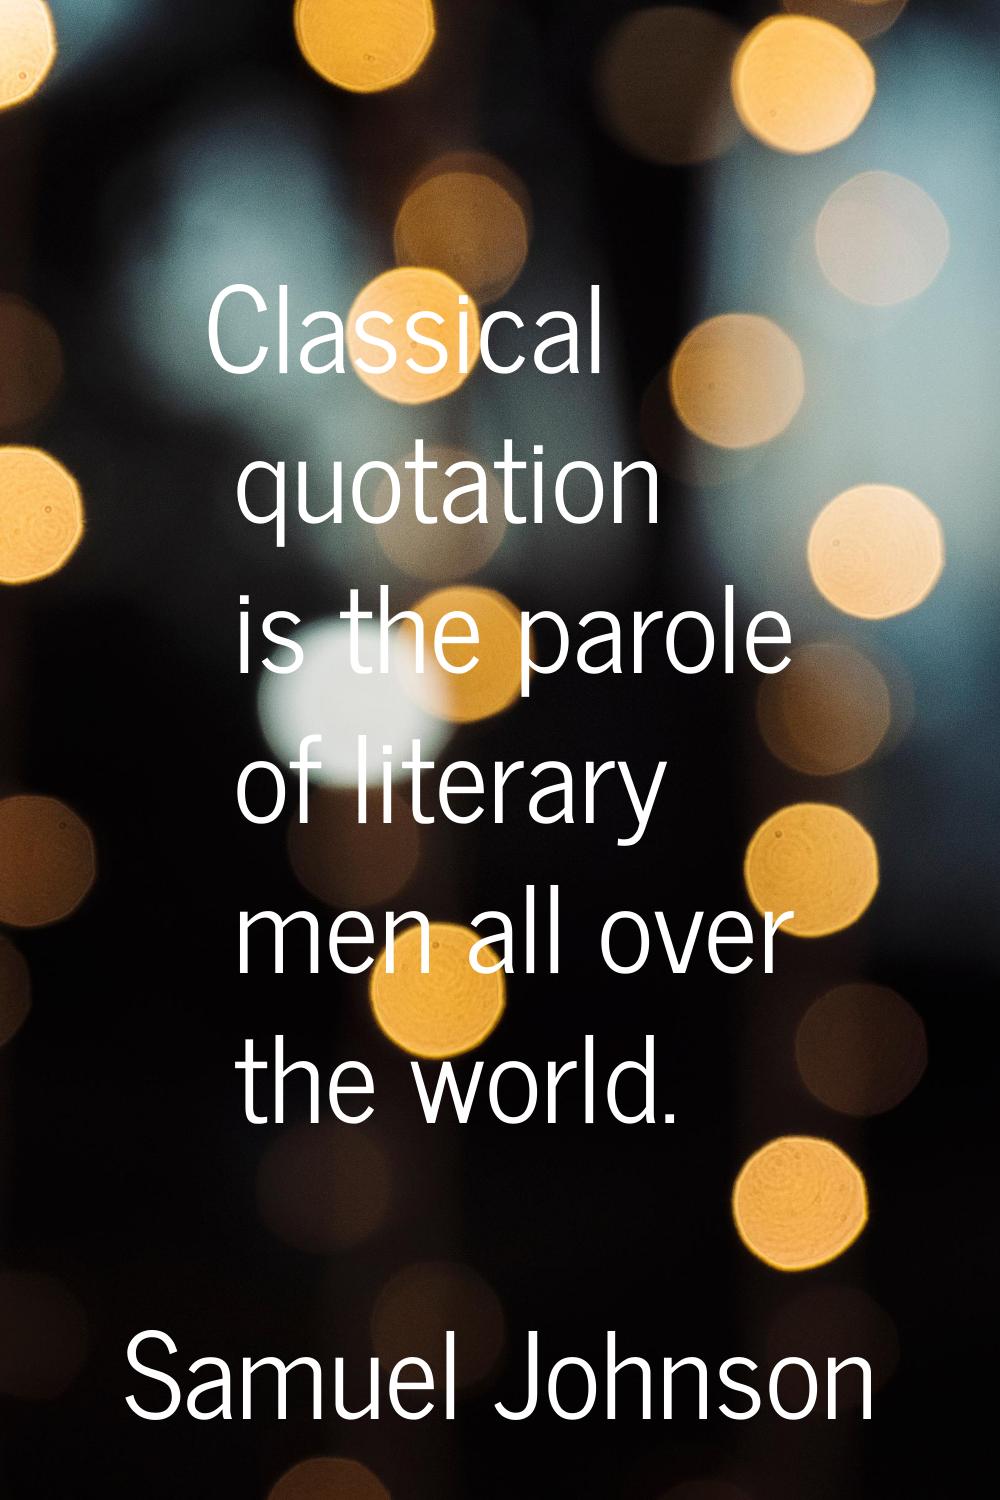 Classical quotation is the parole of literary men all over the world.